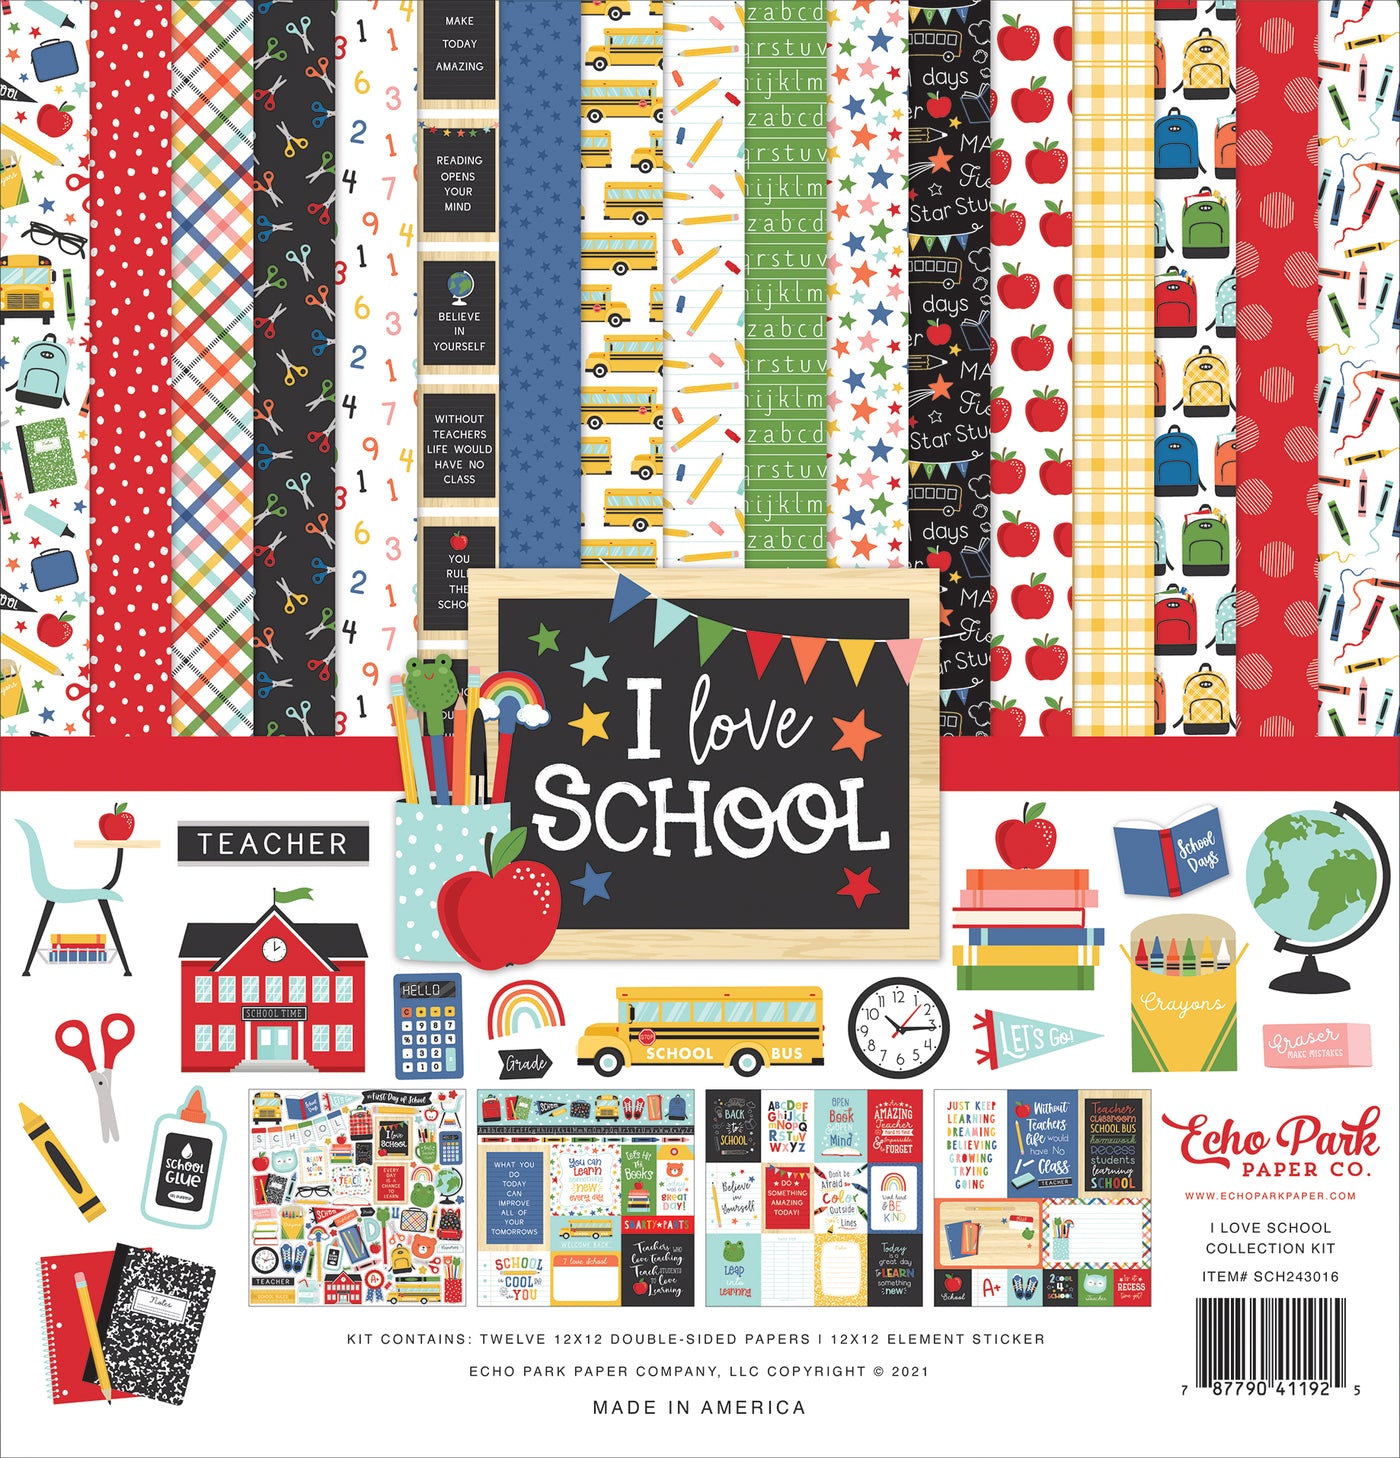 Twelve double-sided papers are featuring school themes. Designs and images of school. 12x12 inch textured cardstock. Archival quality and acid-free.